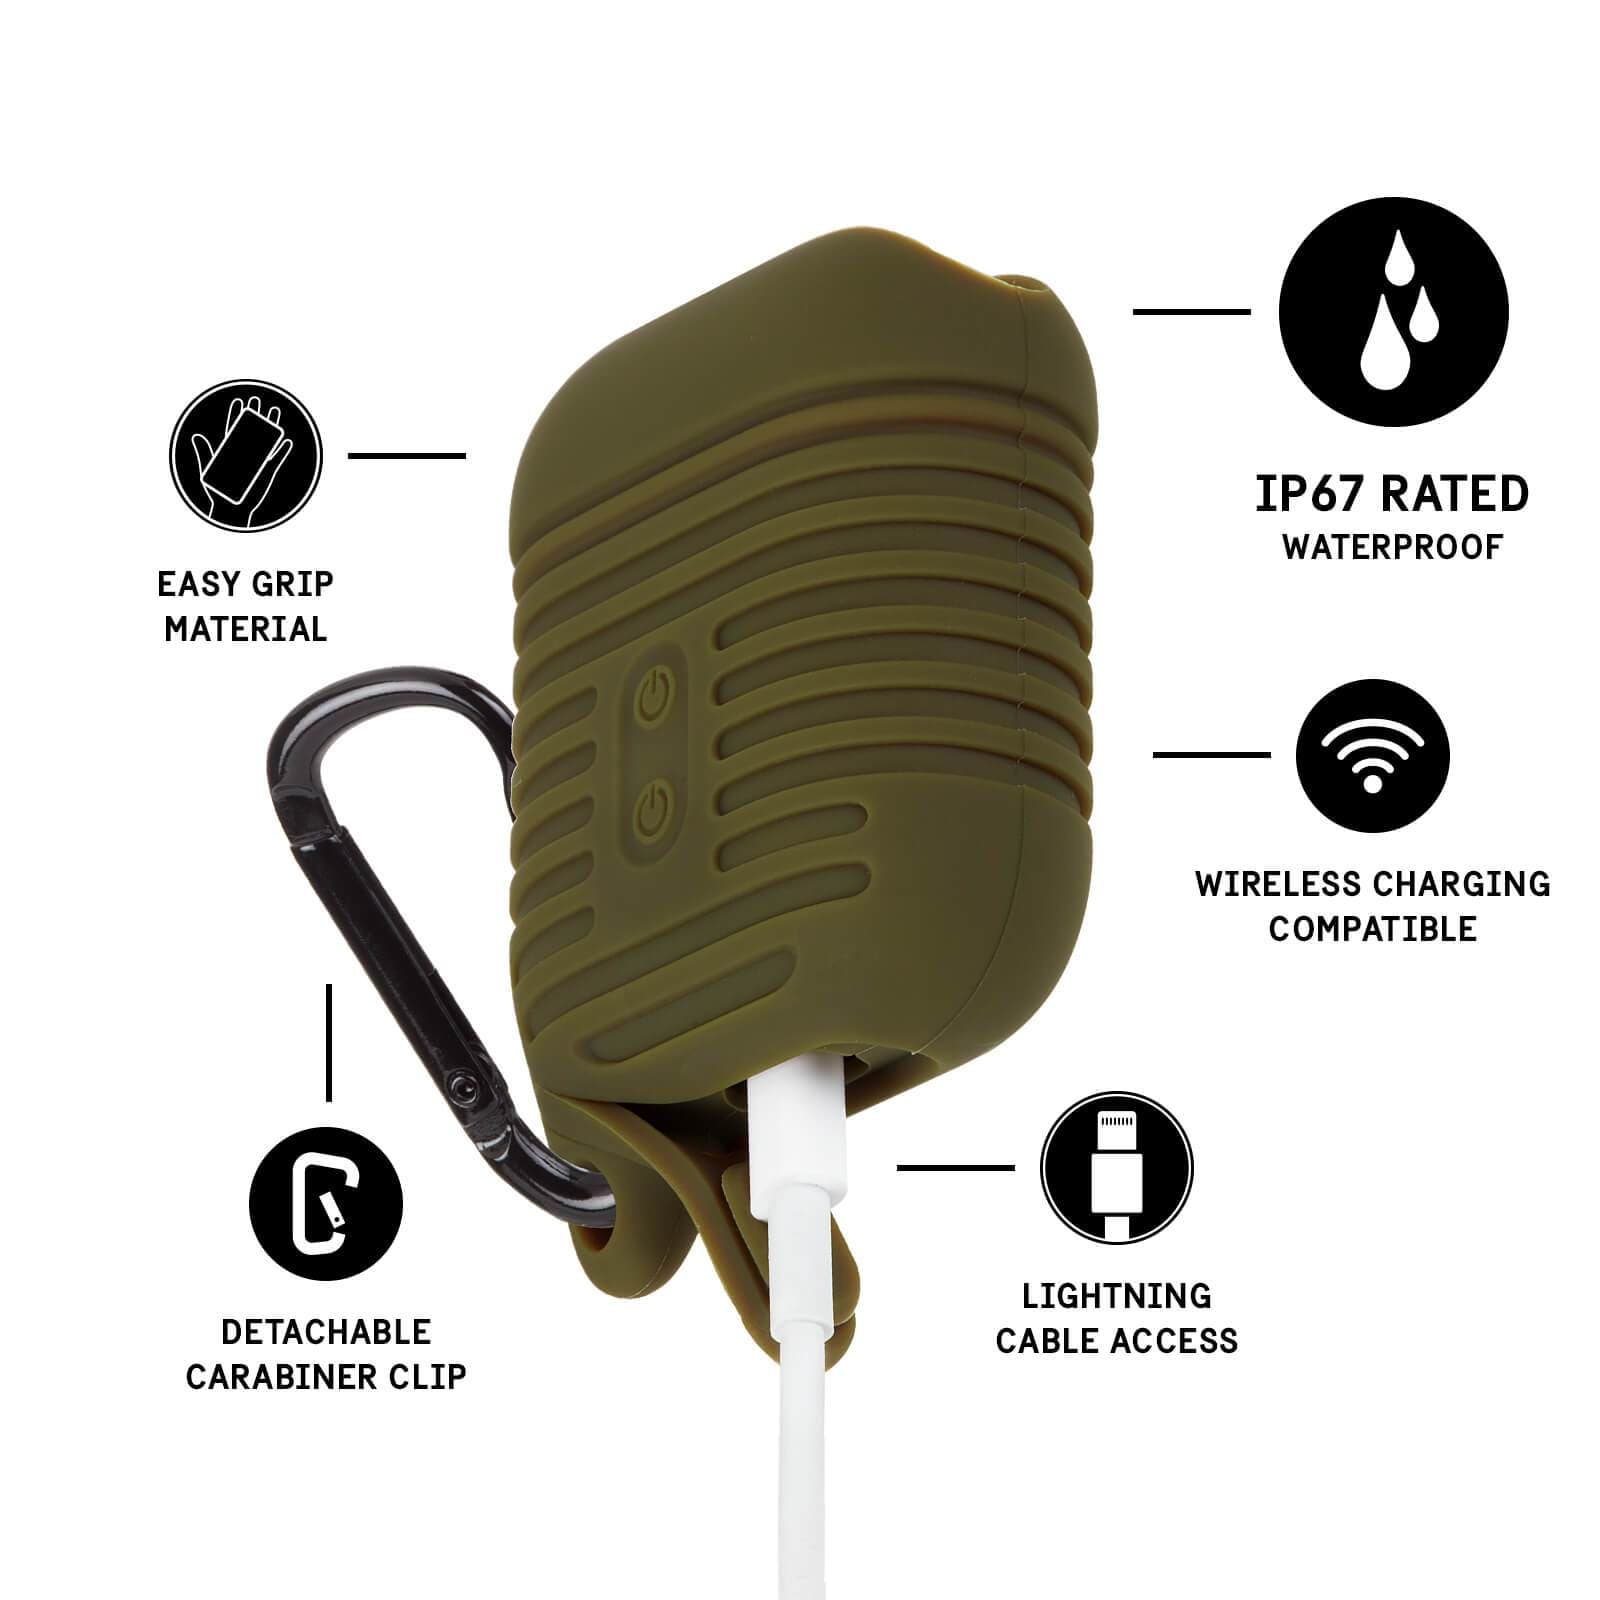 Features easy grip material, detachable carabiner clip, IP67 rated waterproof, wireless charging compatible, lightning cable access. color::Olive Green